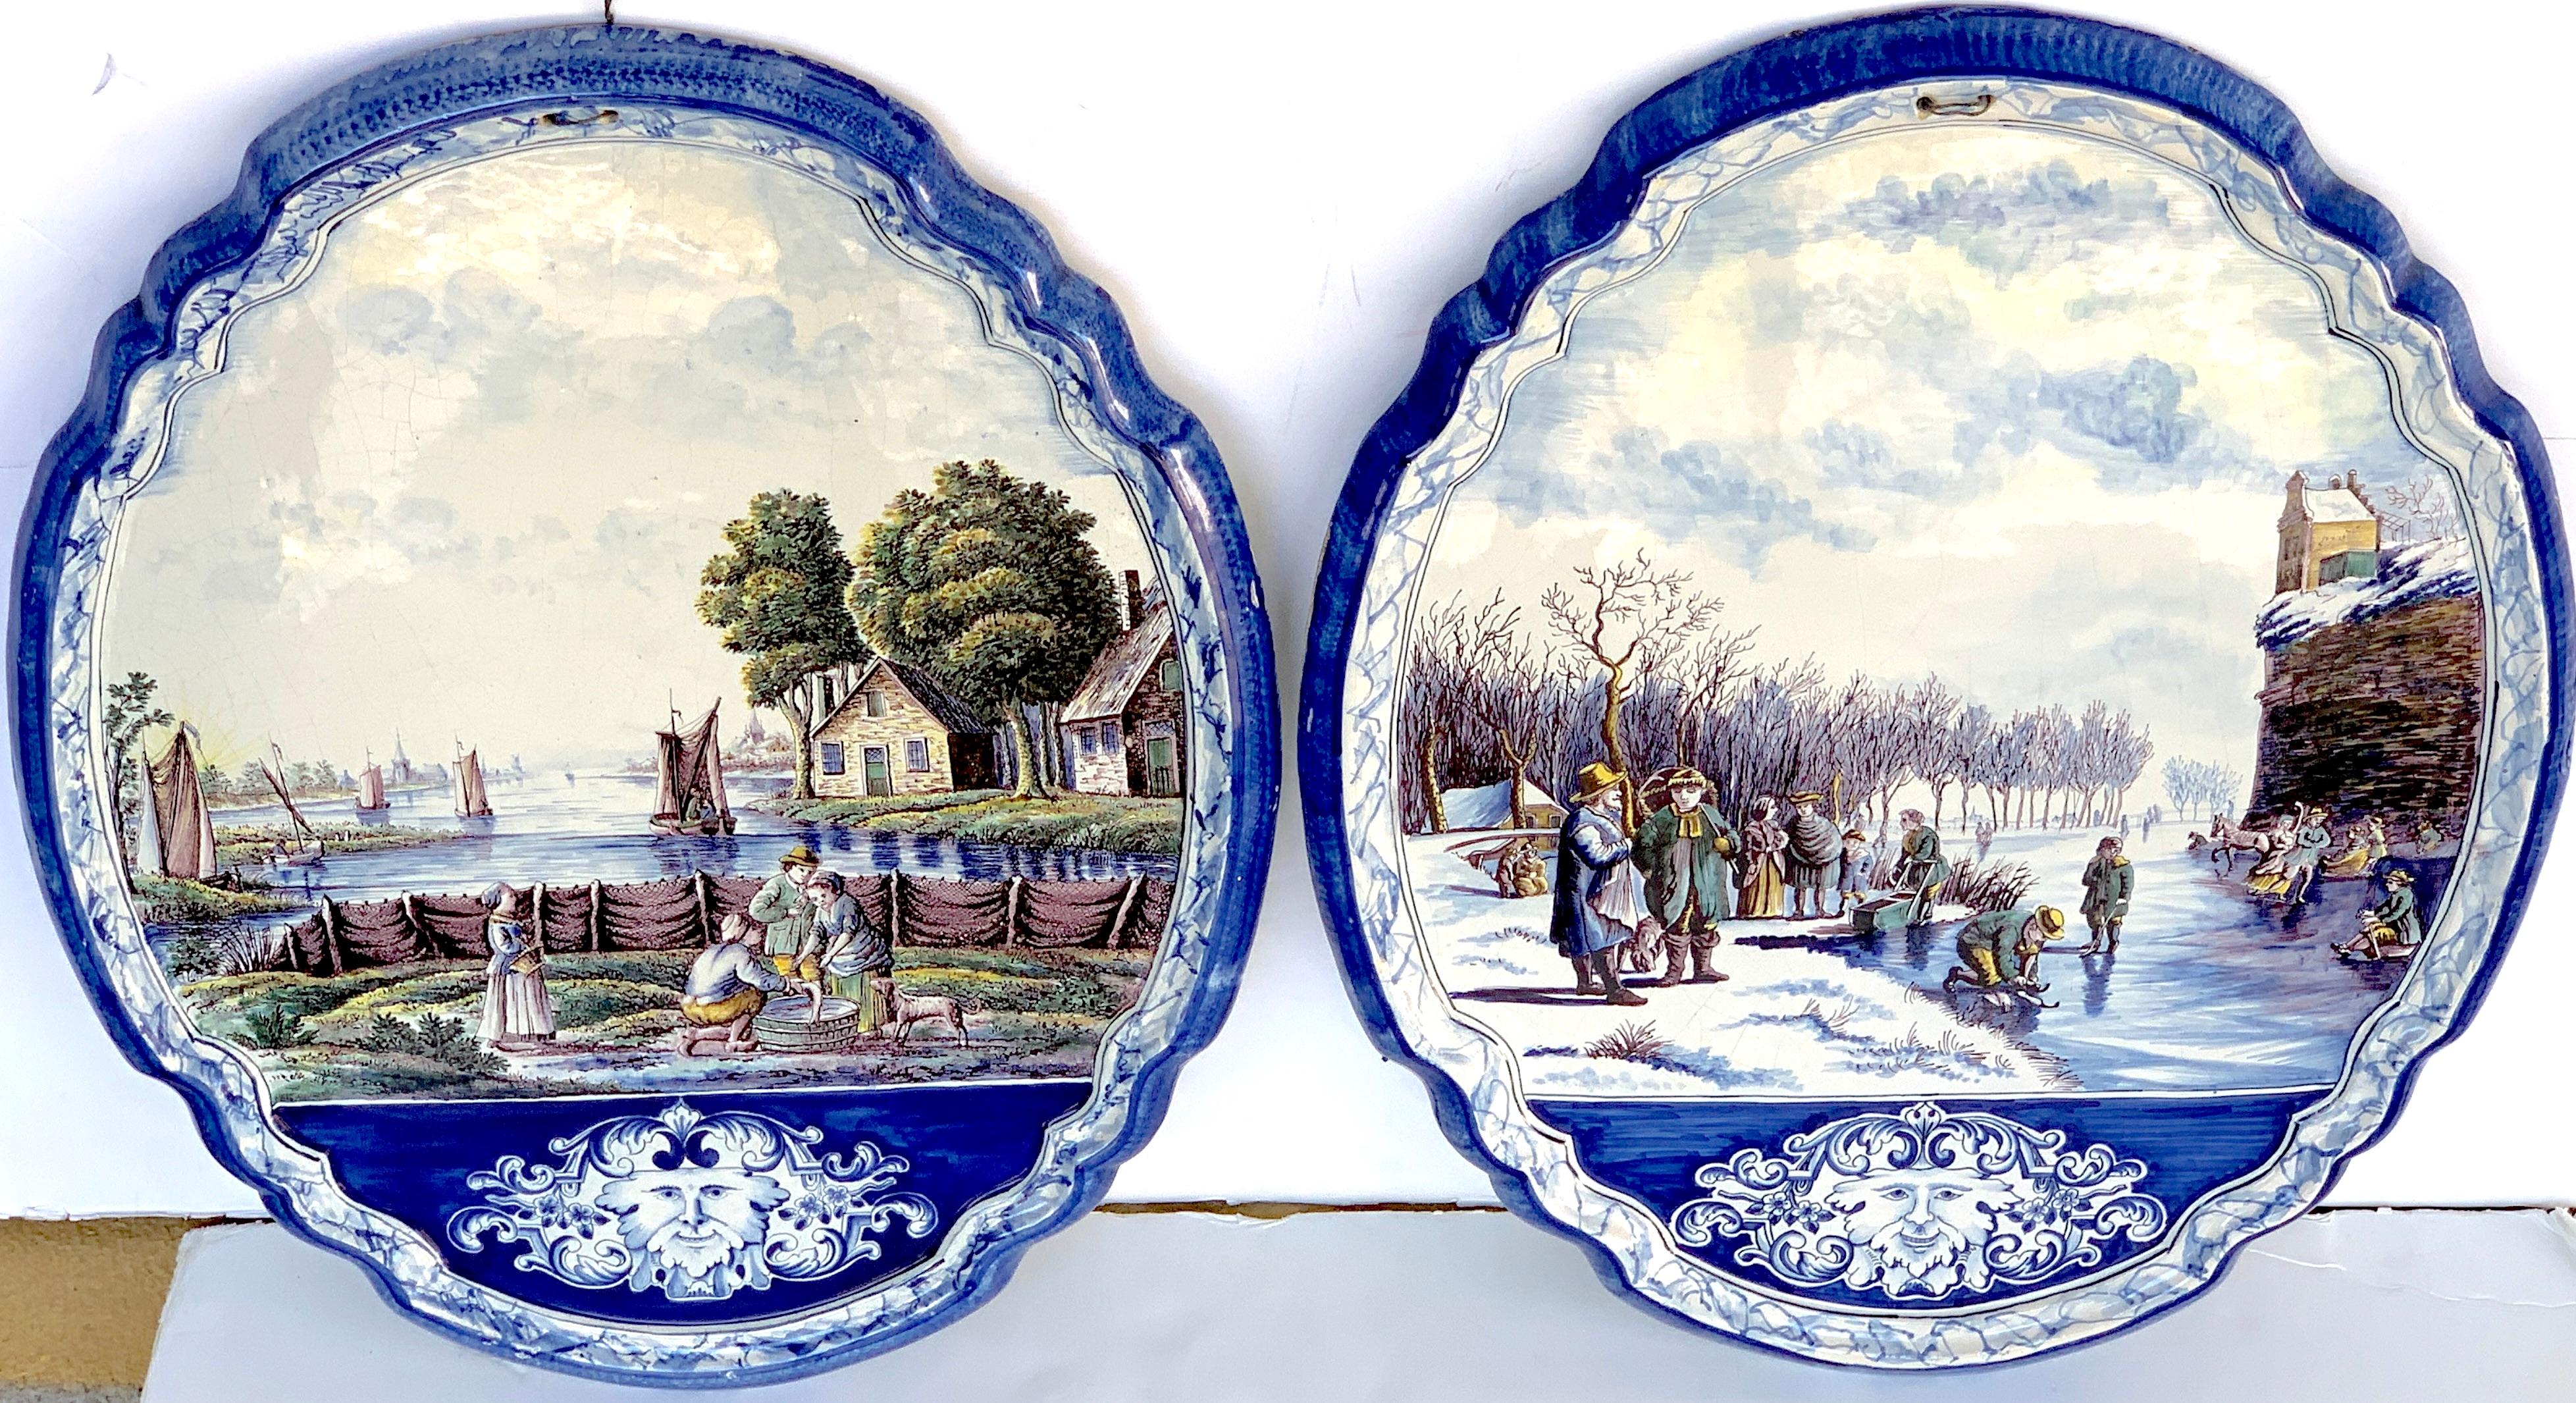 Large pair of antique delft topographical wall plaques, each one decorated in blue and white with landscapes, one a winter lake scene, the other summer lake view, both with a medallion at the bottom of the plaque. Each one signed on back 